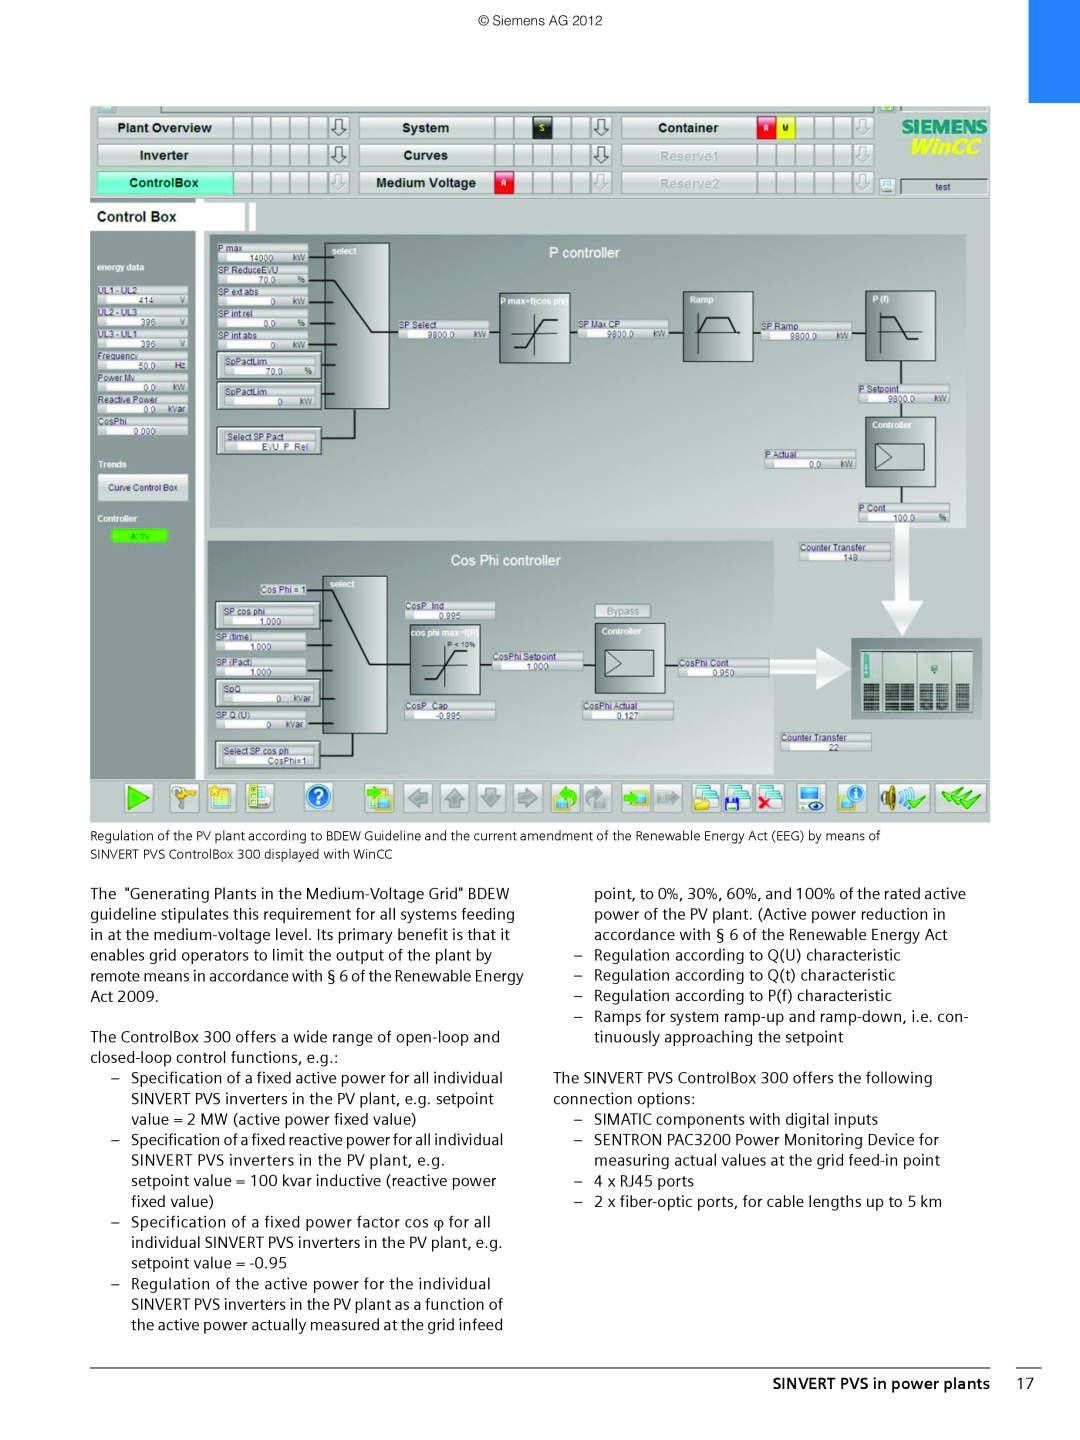 Siemens 600 brochure power of the PV plant. Active power reduction in, SINVERT PVS in power plants 